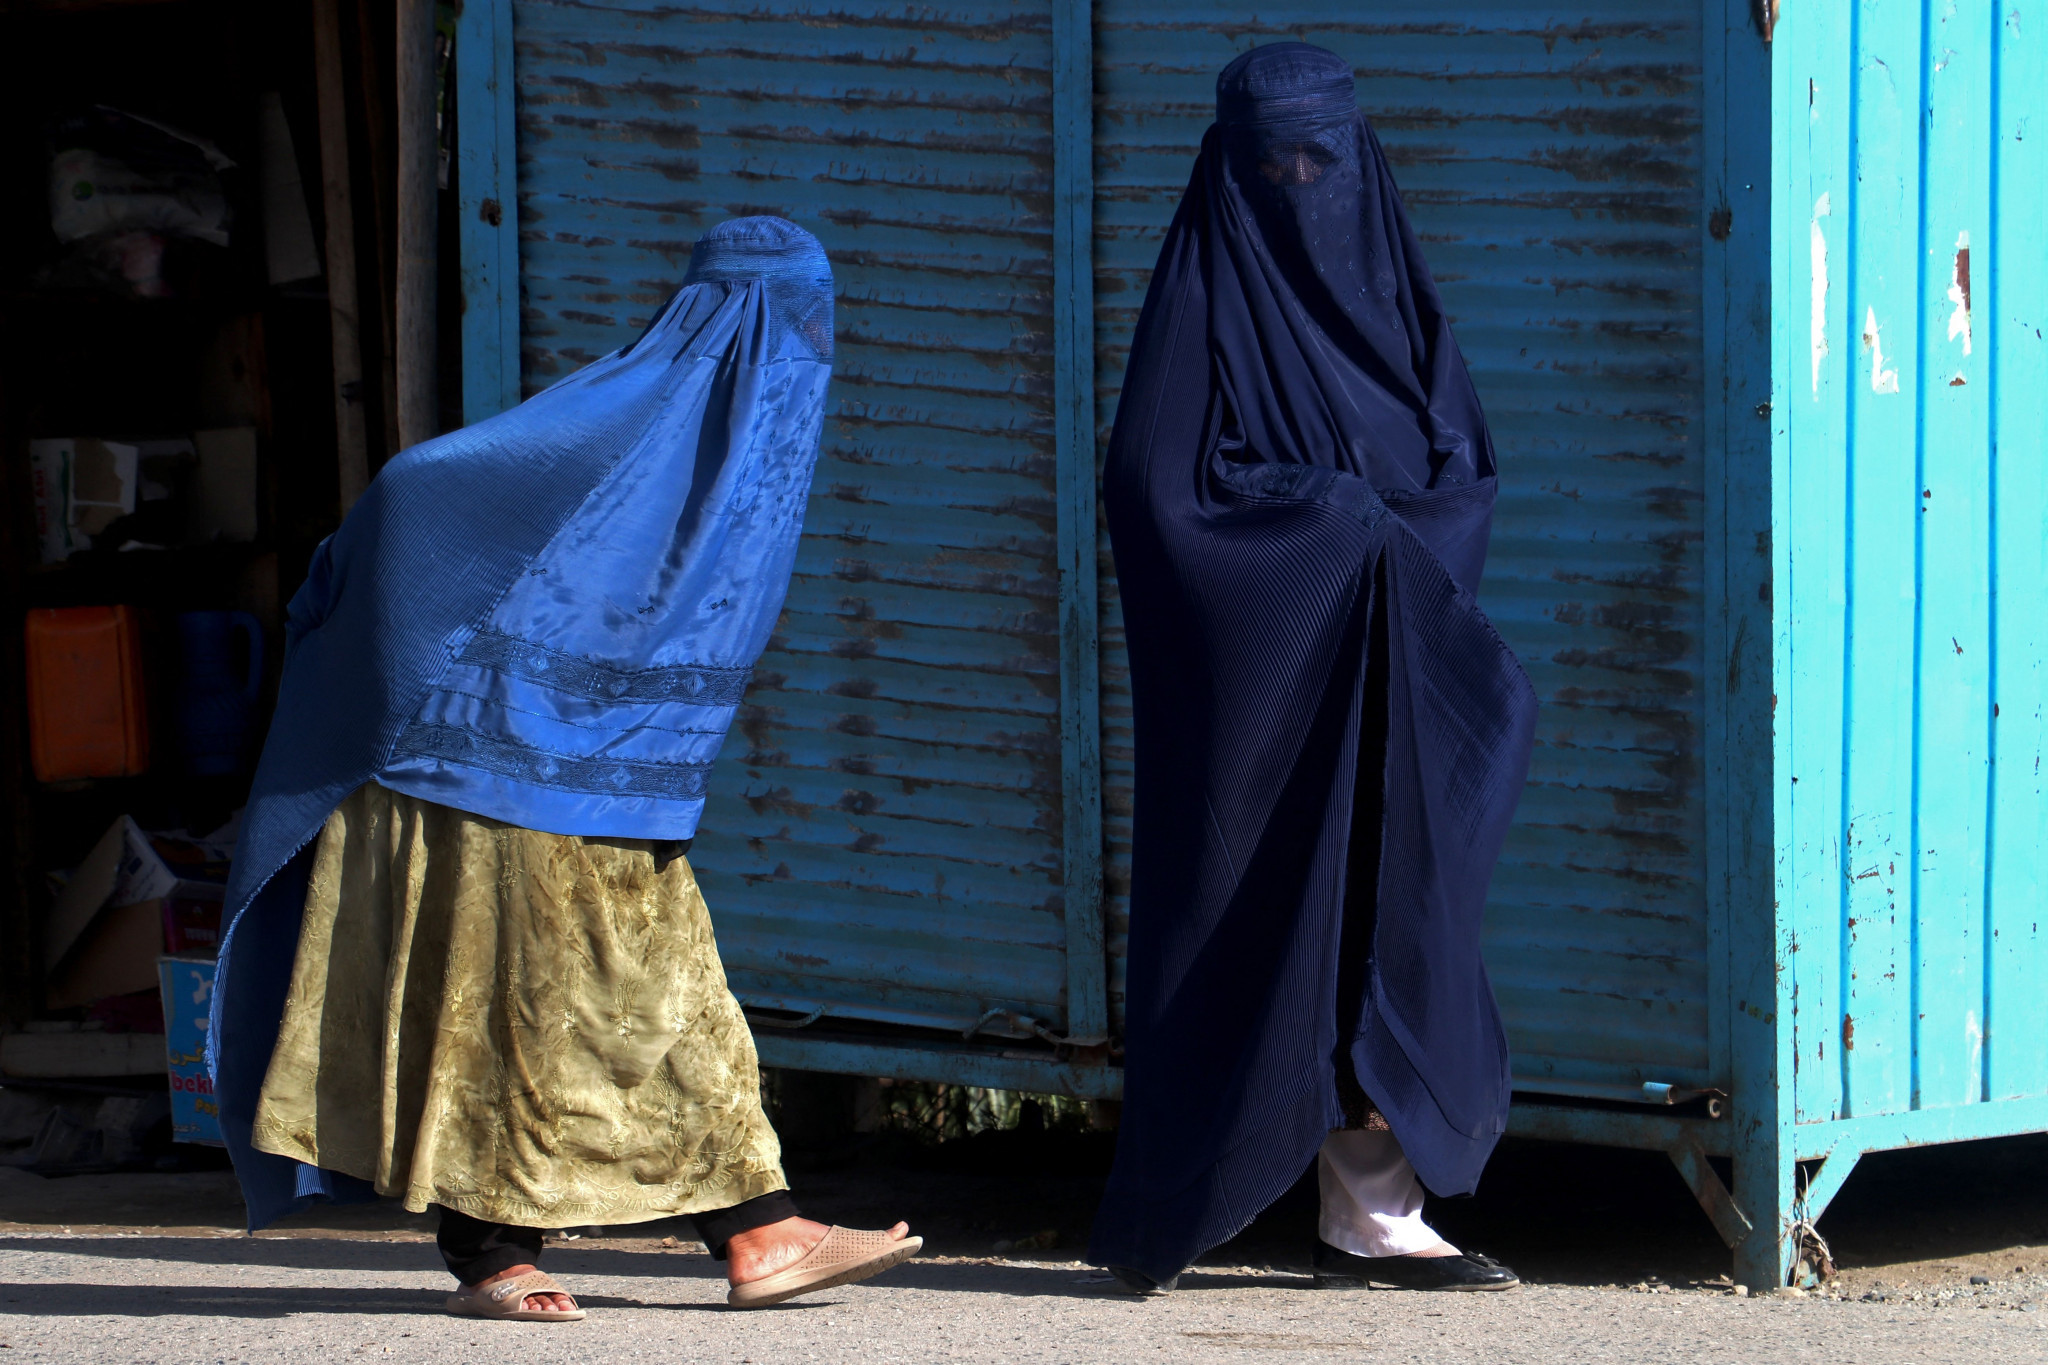 Women are forced to cover their faces under Taliban rule ©Getty Images